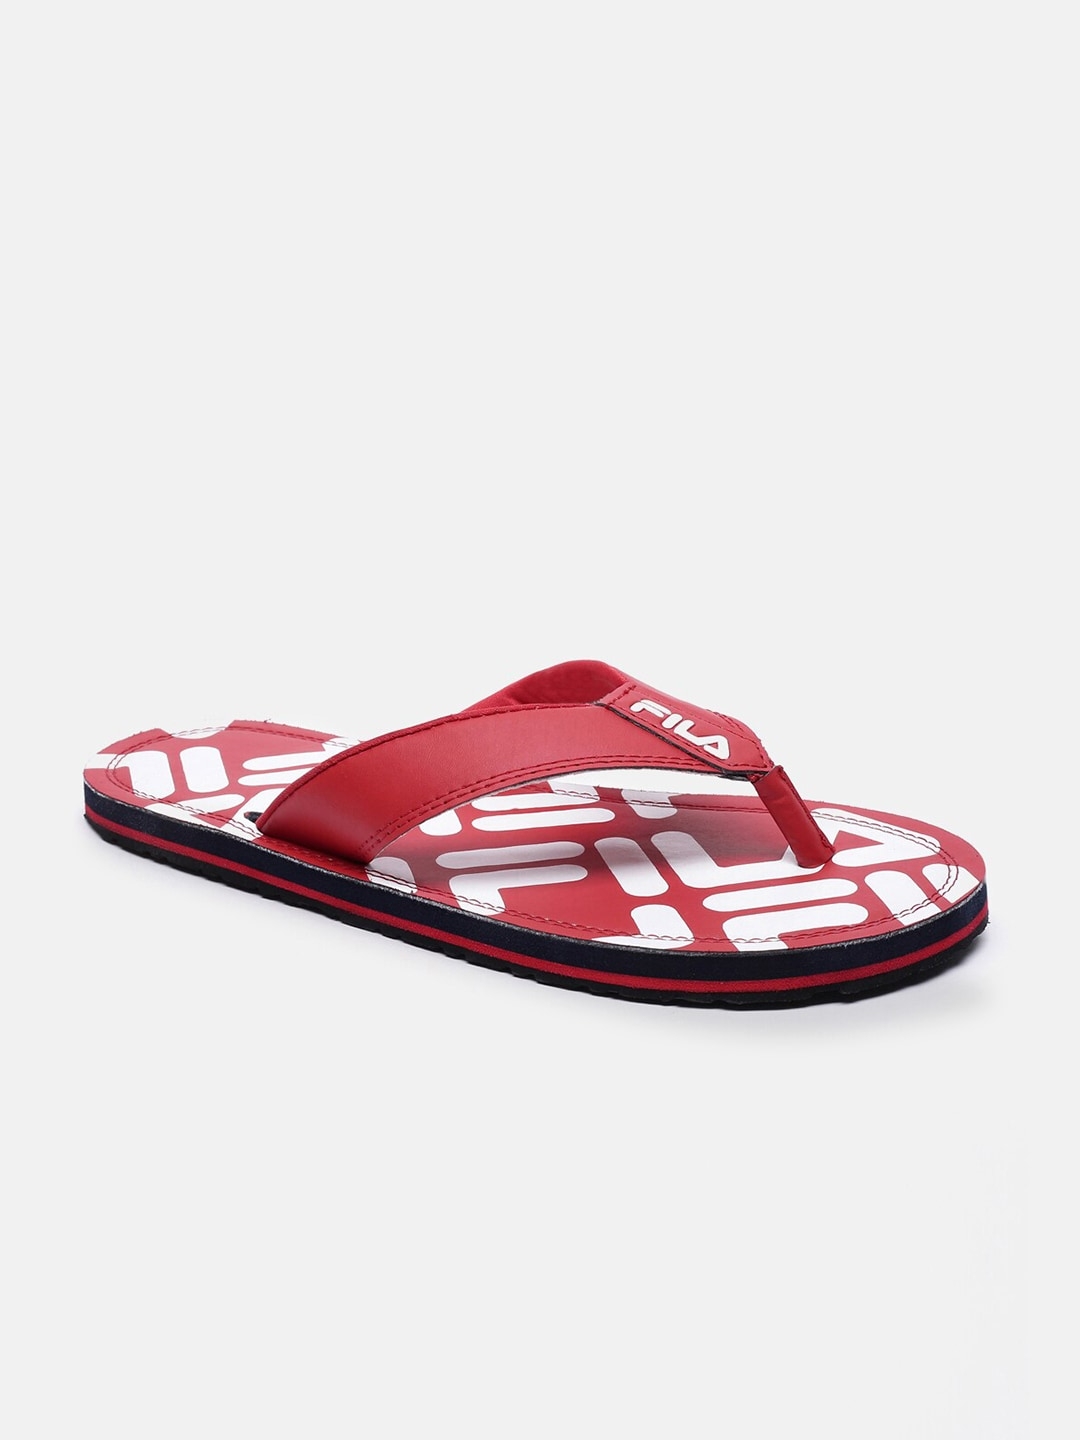 Men's Red PU Slippers